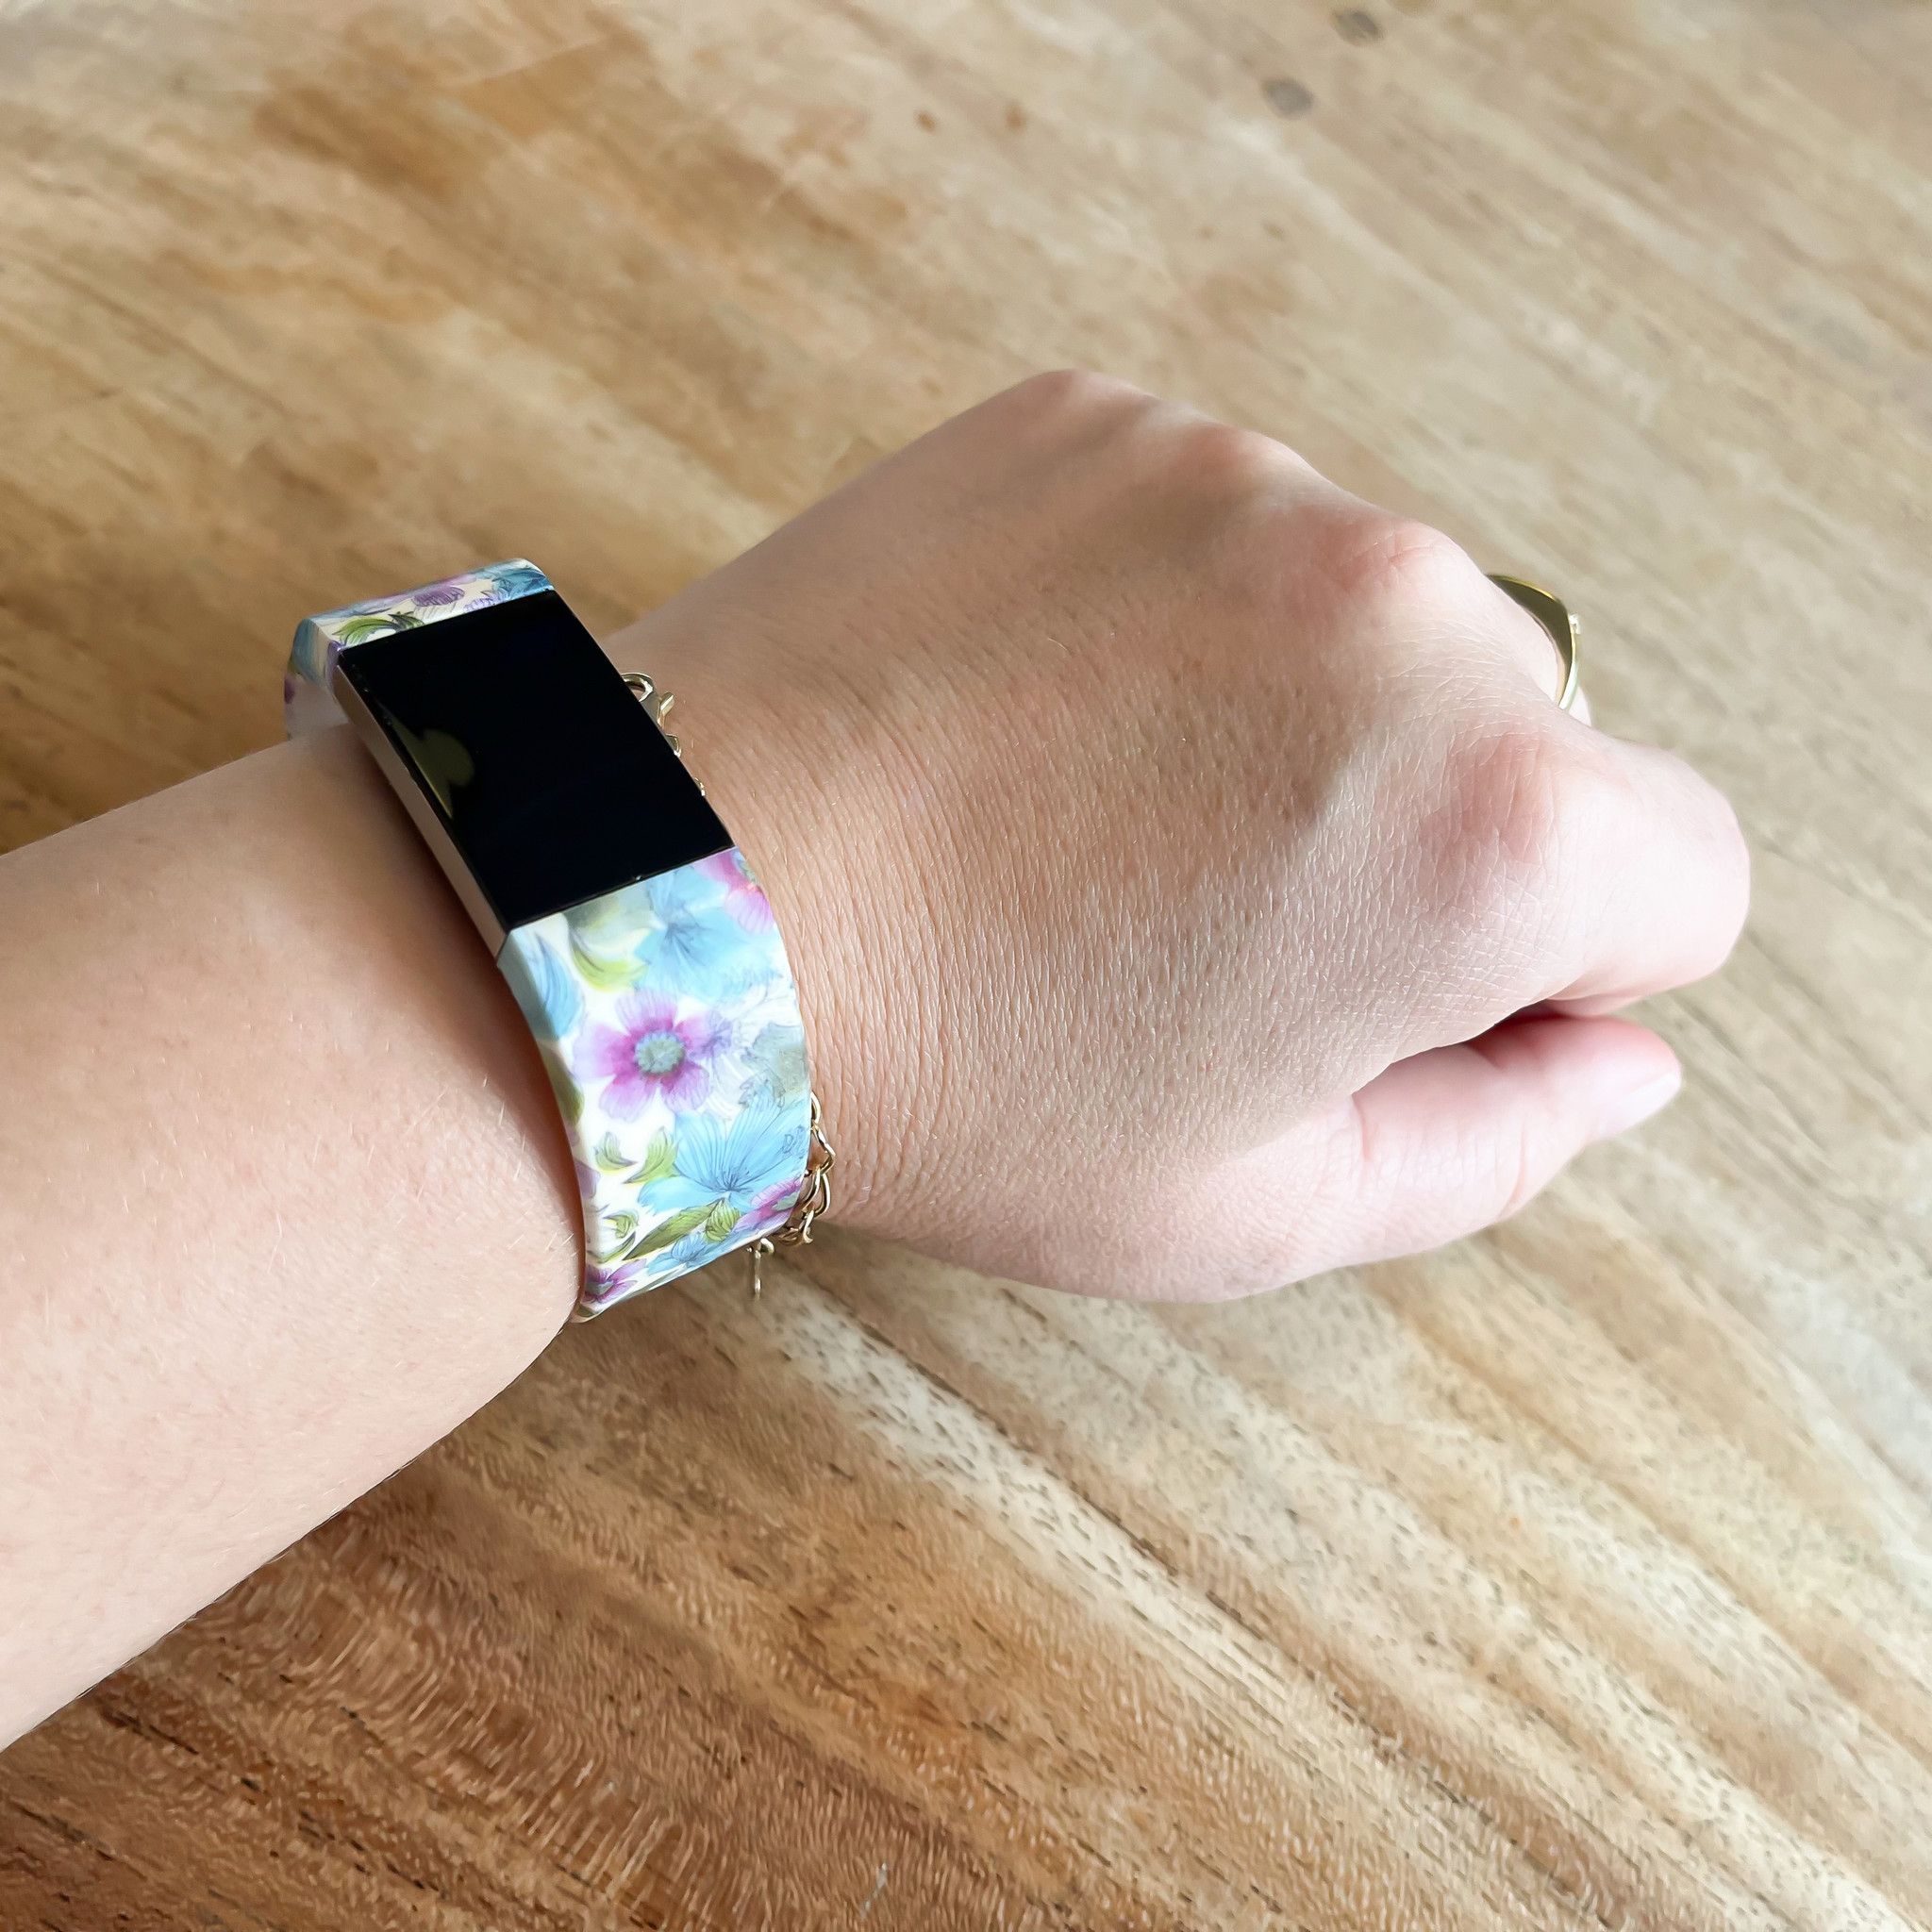 Fitbit Charge 2 Print Sport Strap - Blue Flower